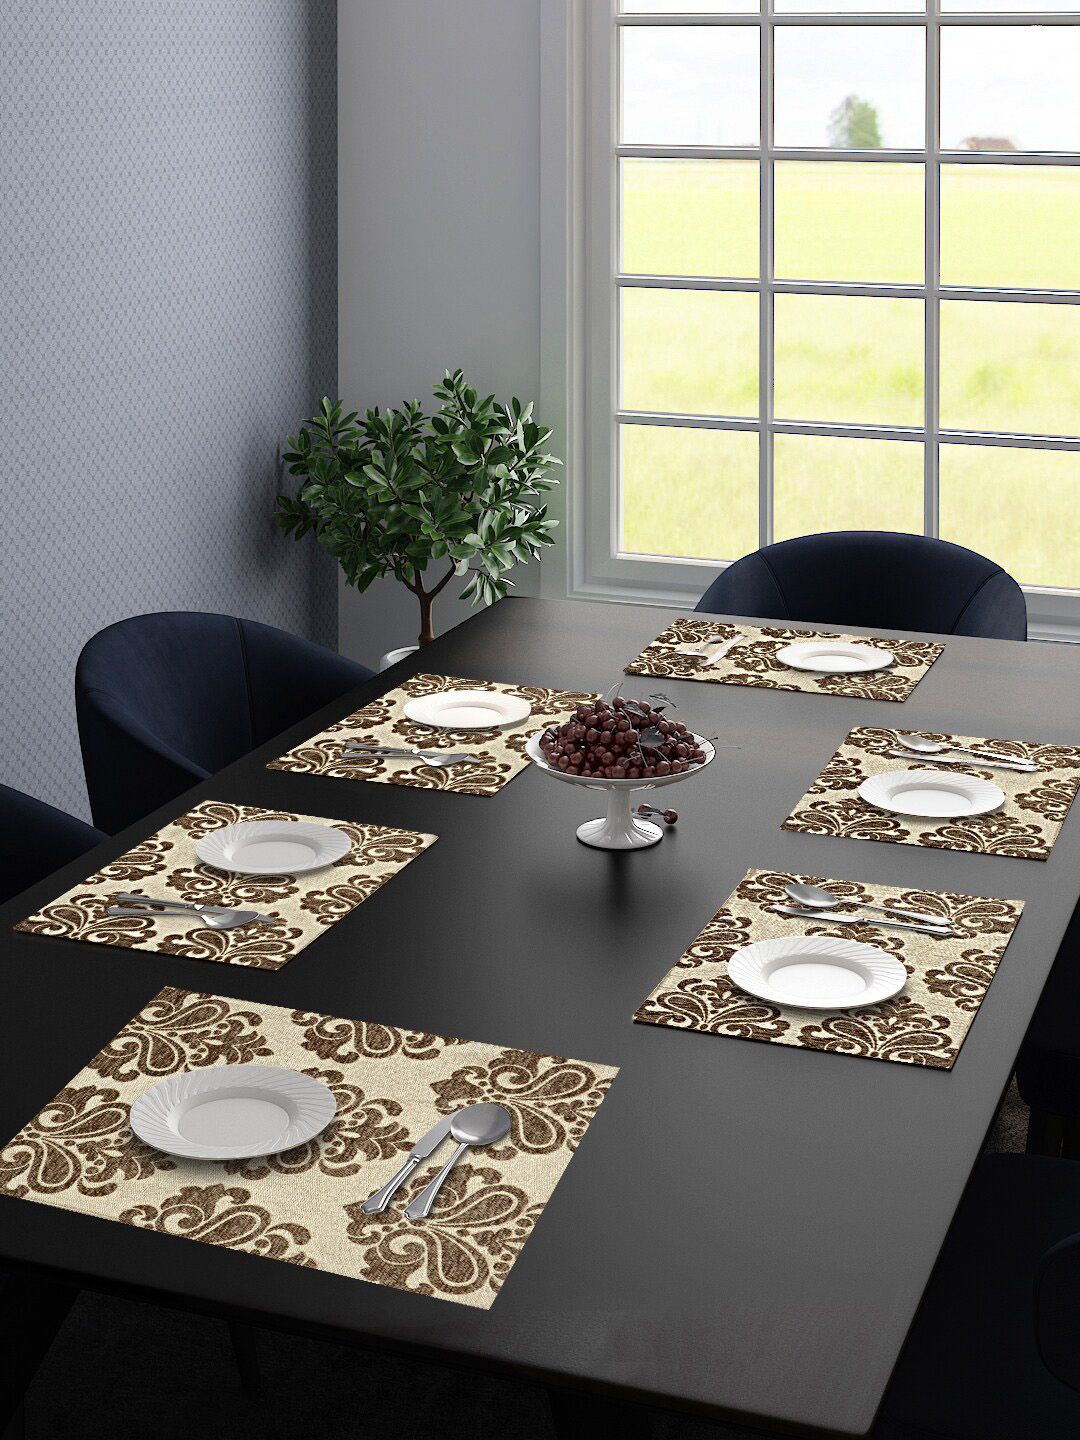 Saral Home 6 Pieces Beige & Grey Ethnic Motifs Table Placemats Price in India